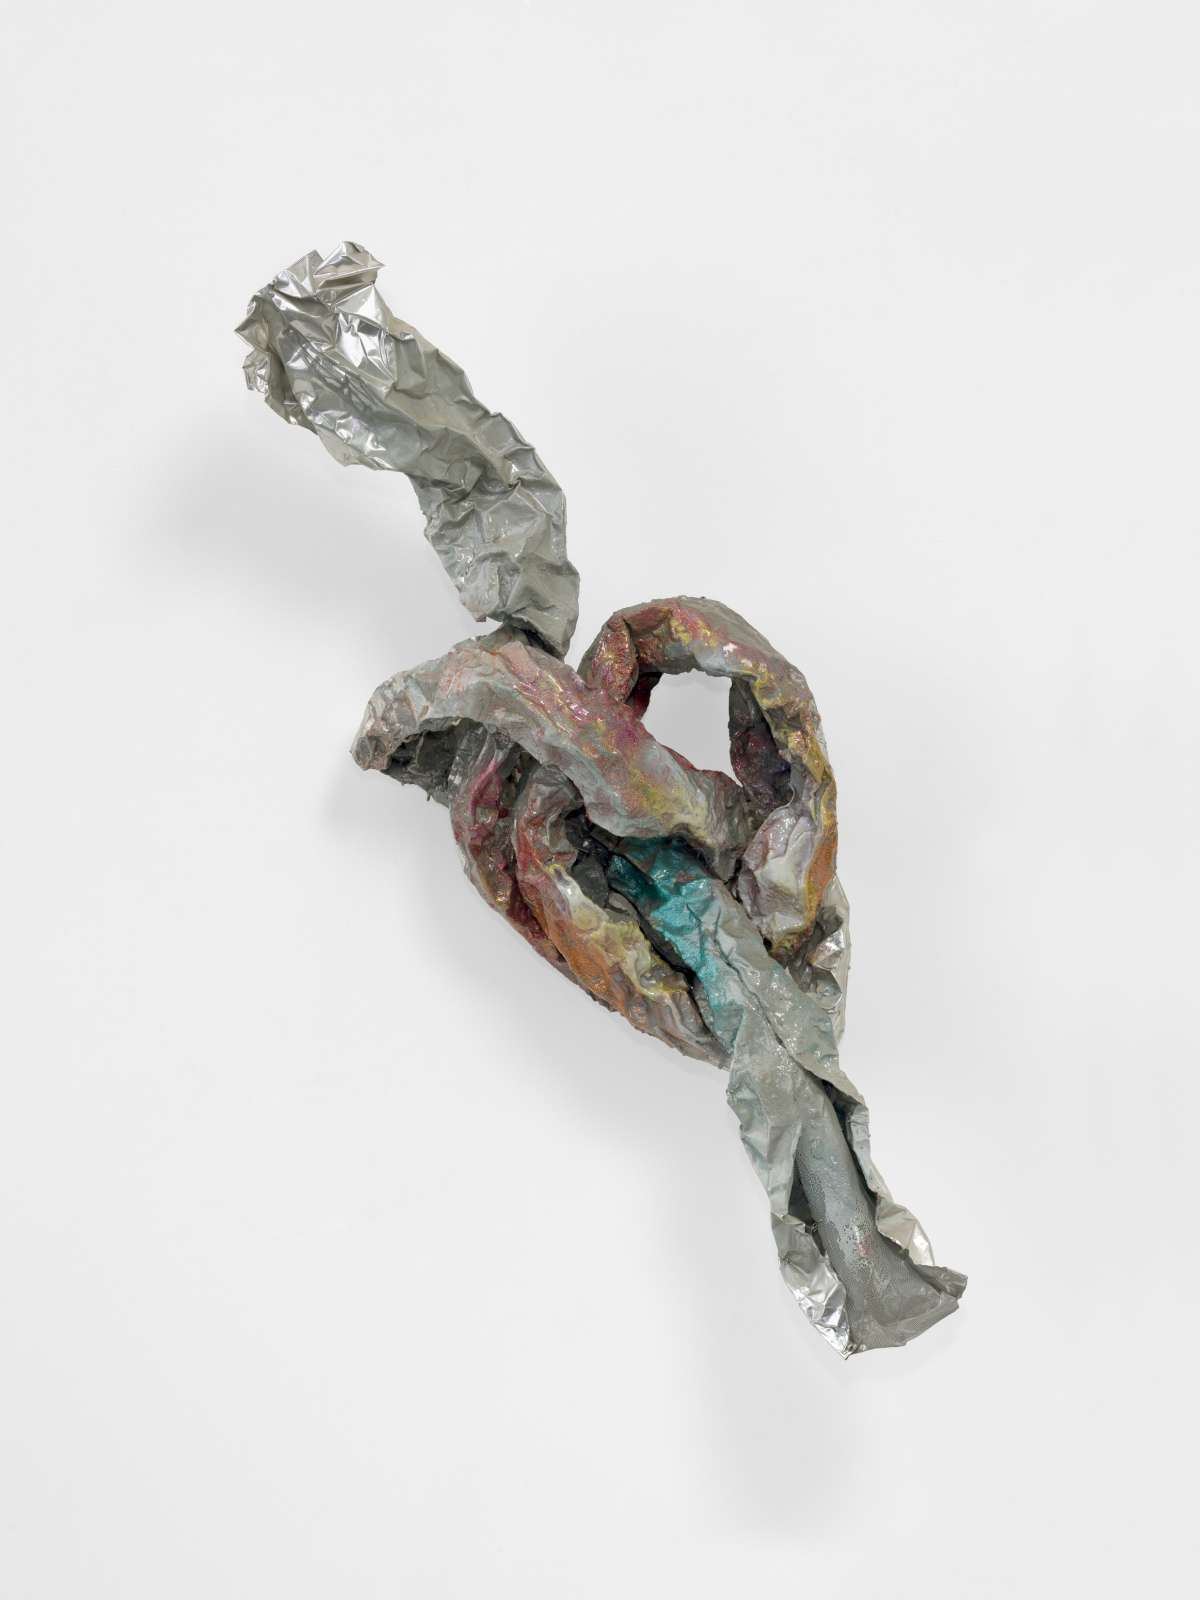 Lynda Benglis, 'Dill', 1974, aluminium wire mesh, aluminium foil, sparkles, sculp-metal, lacquer, 135.9 x 48.3 x 38.1 cm. 53 1/2 x 19 1/2 x 15 in.  © Lynda Benglis. Licensed by VAGA at Artists Rights Society (ARS), NY. Courtesy the artist, Pace Gallery and Thomas Dane Gallery. Photo: Todd-White Art Photography.